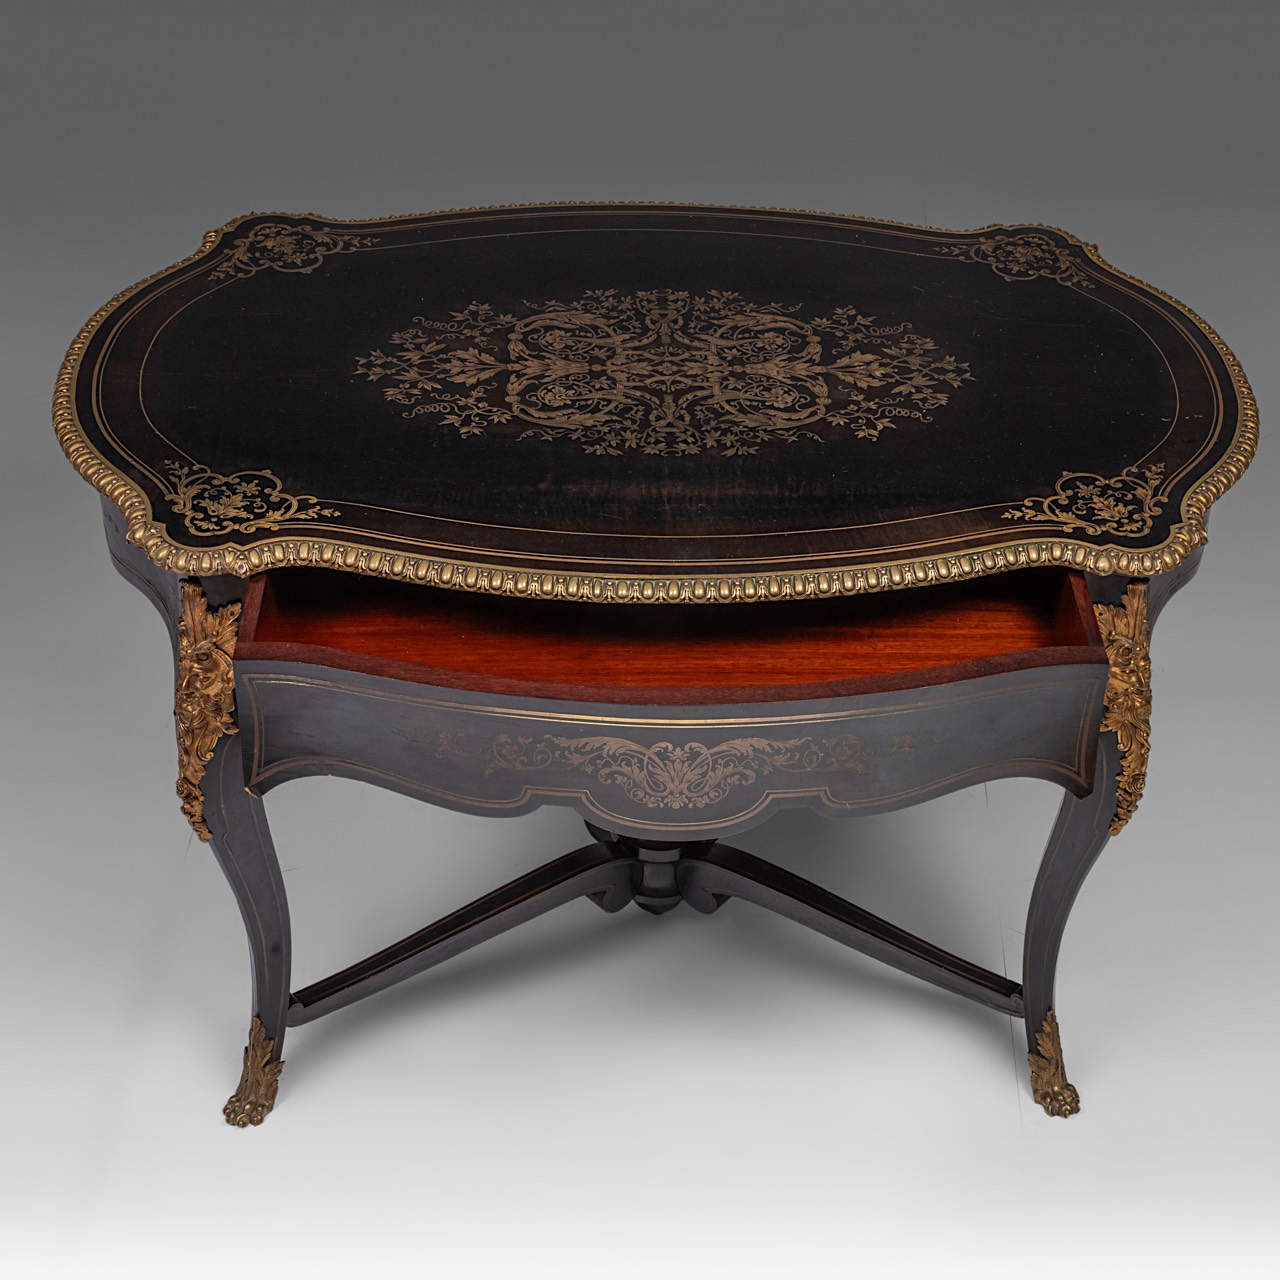 A Napoleon III (1852-1870) Boulle centre table, stamped 'HPR' Henri Picard (1840-1890), H 75 - W 120 - Image 7 of 10